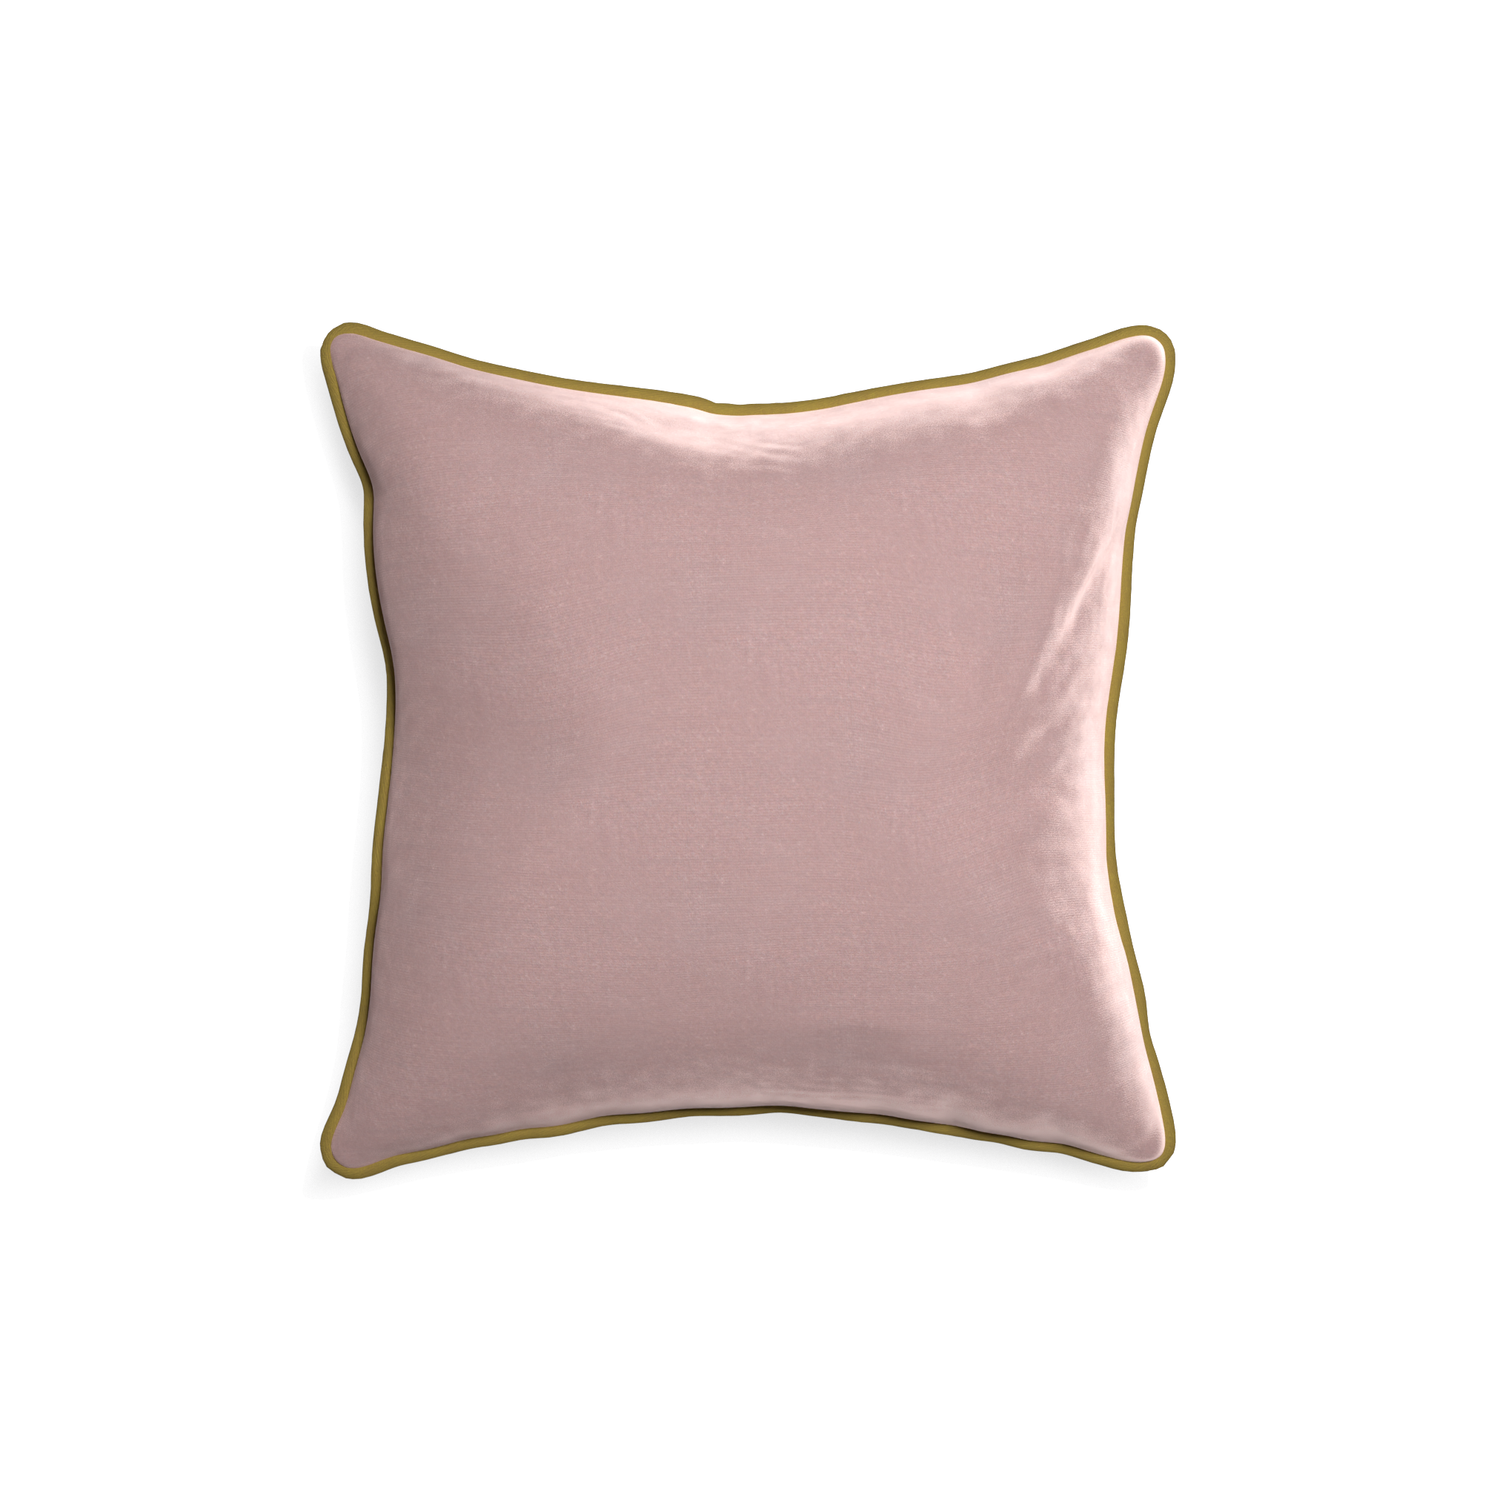 18-square mauve velvet custom mauvepillow with c piping on white background